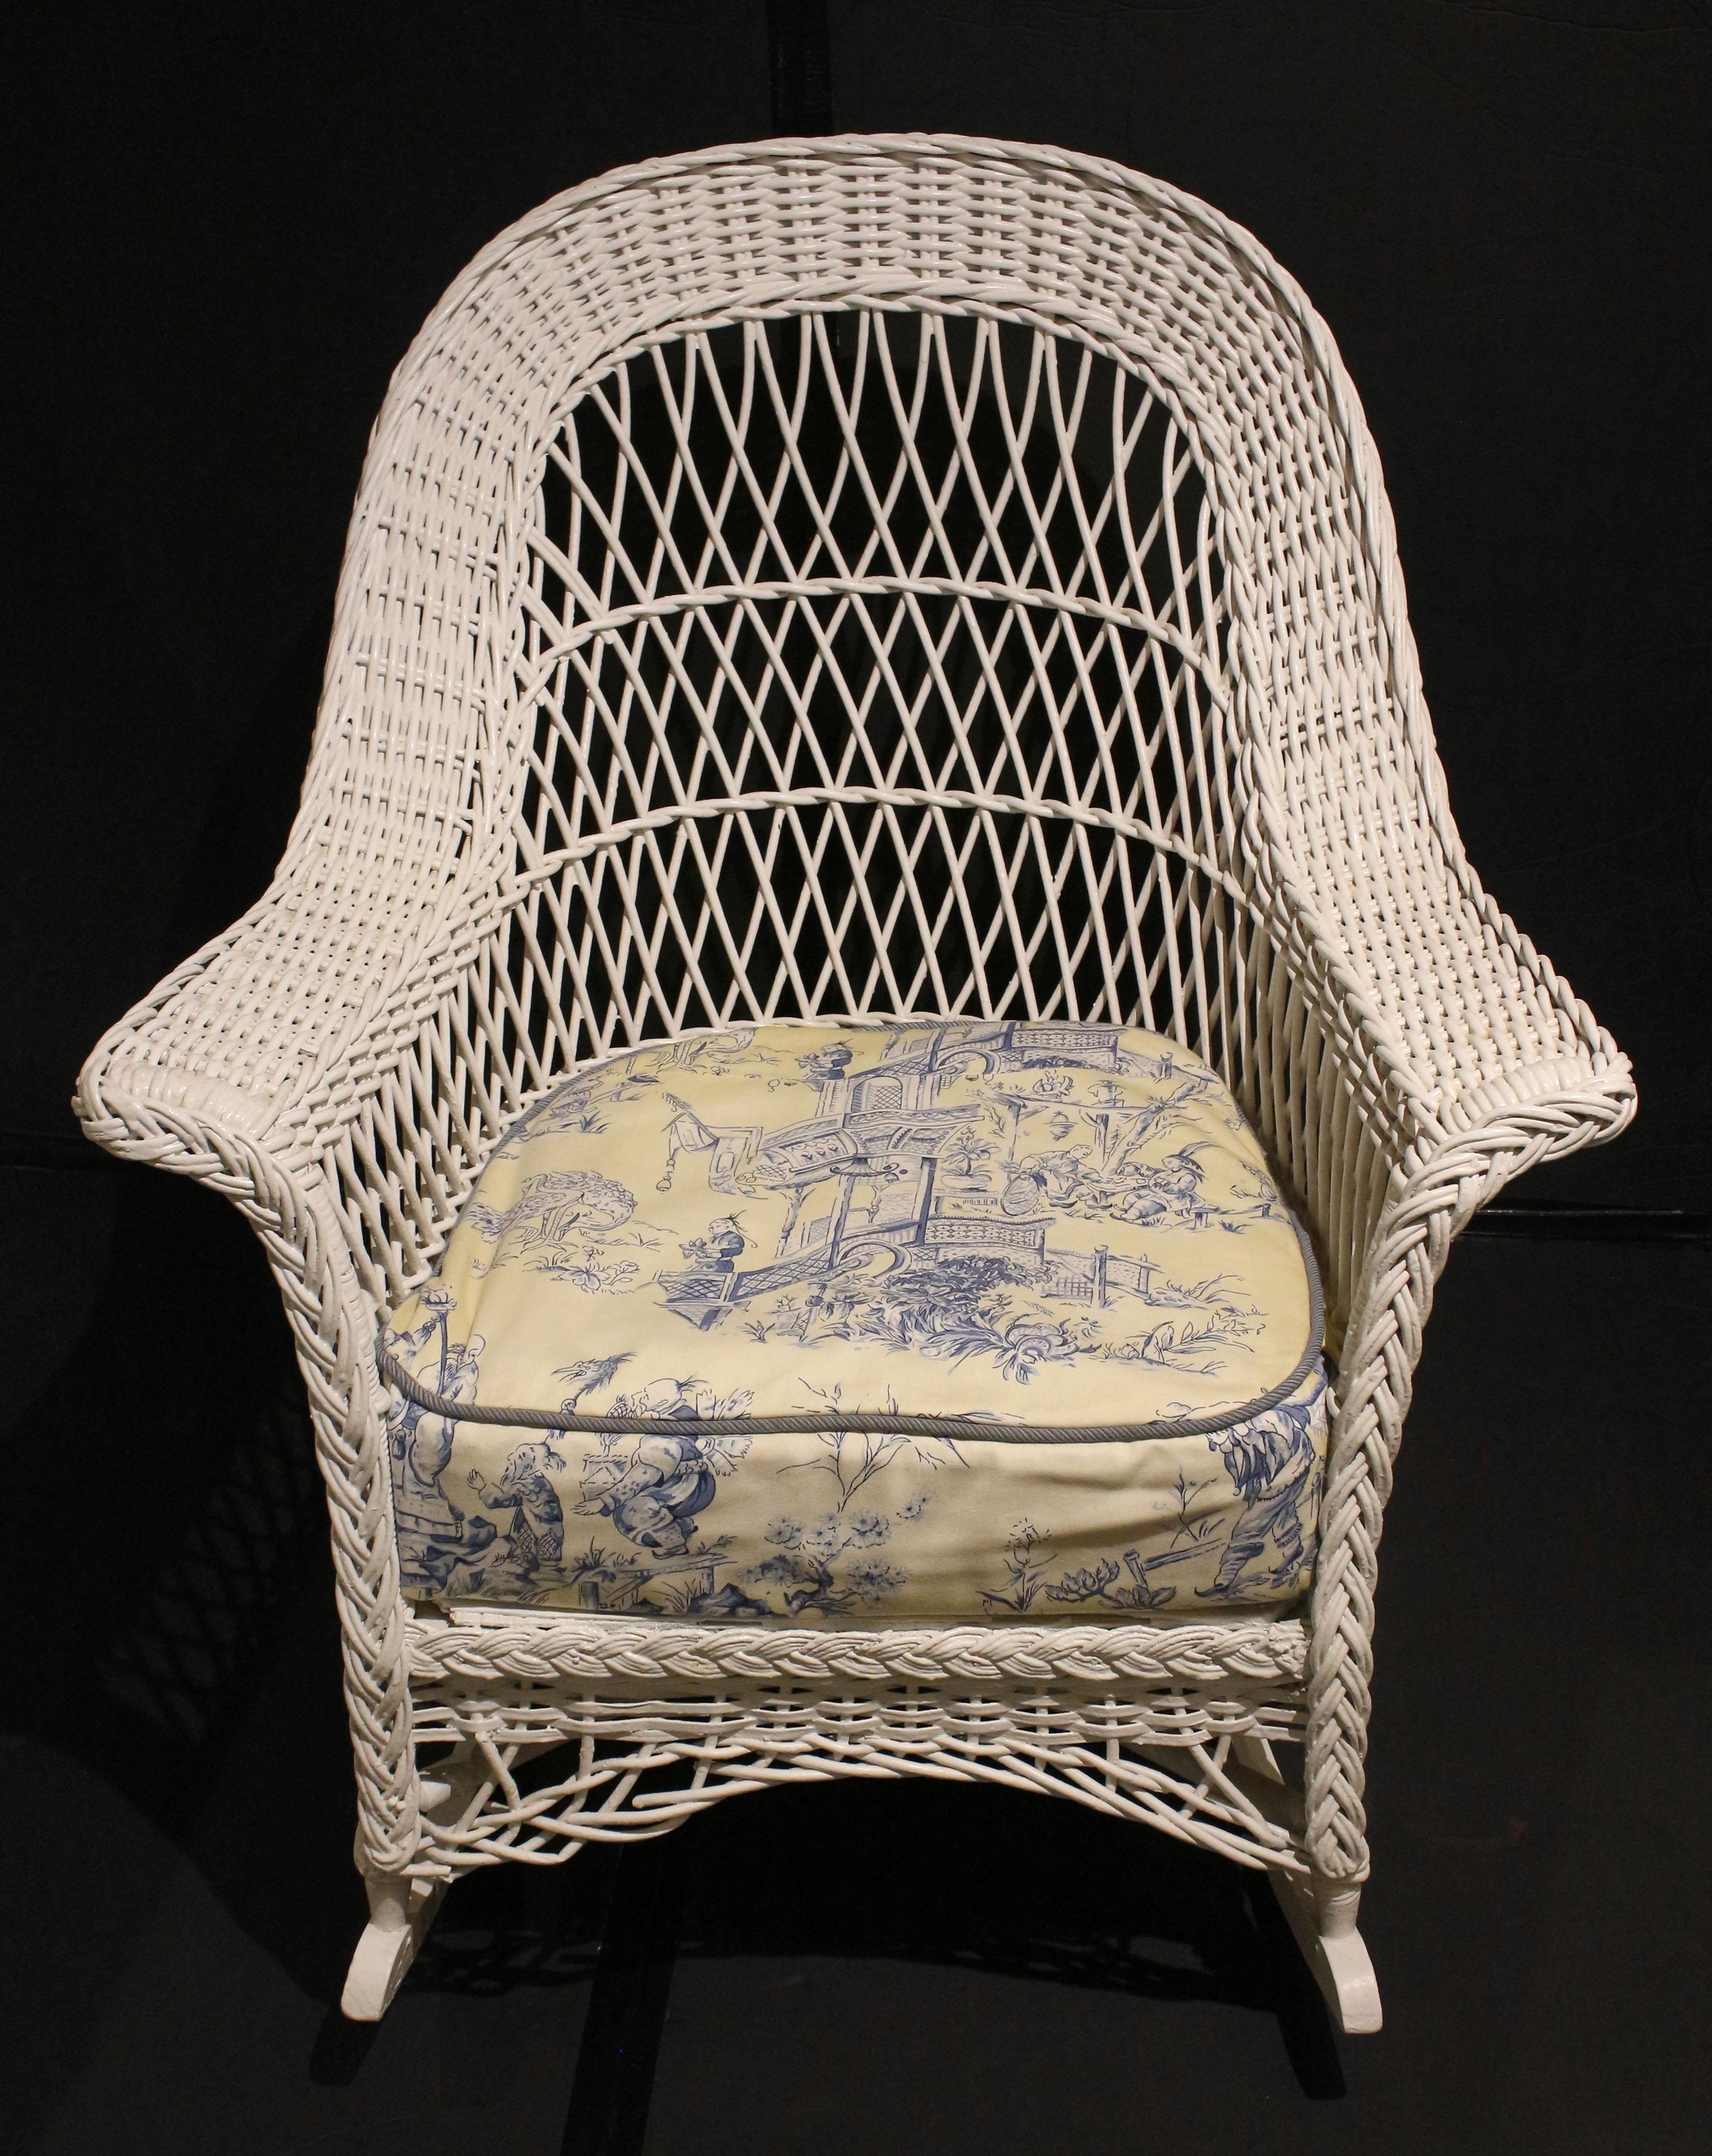 Early 20th century Heywood-Wakefield Bar Harbor wicker rocking chair. Attractively braided arms & wonderful open diamond reed-work back. Repainted. Custom toile cushion (used condition). 
30.25